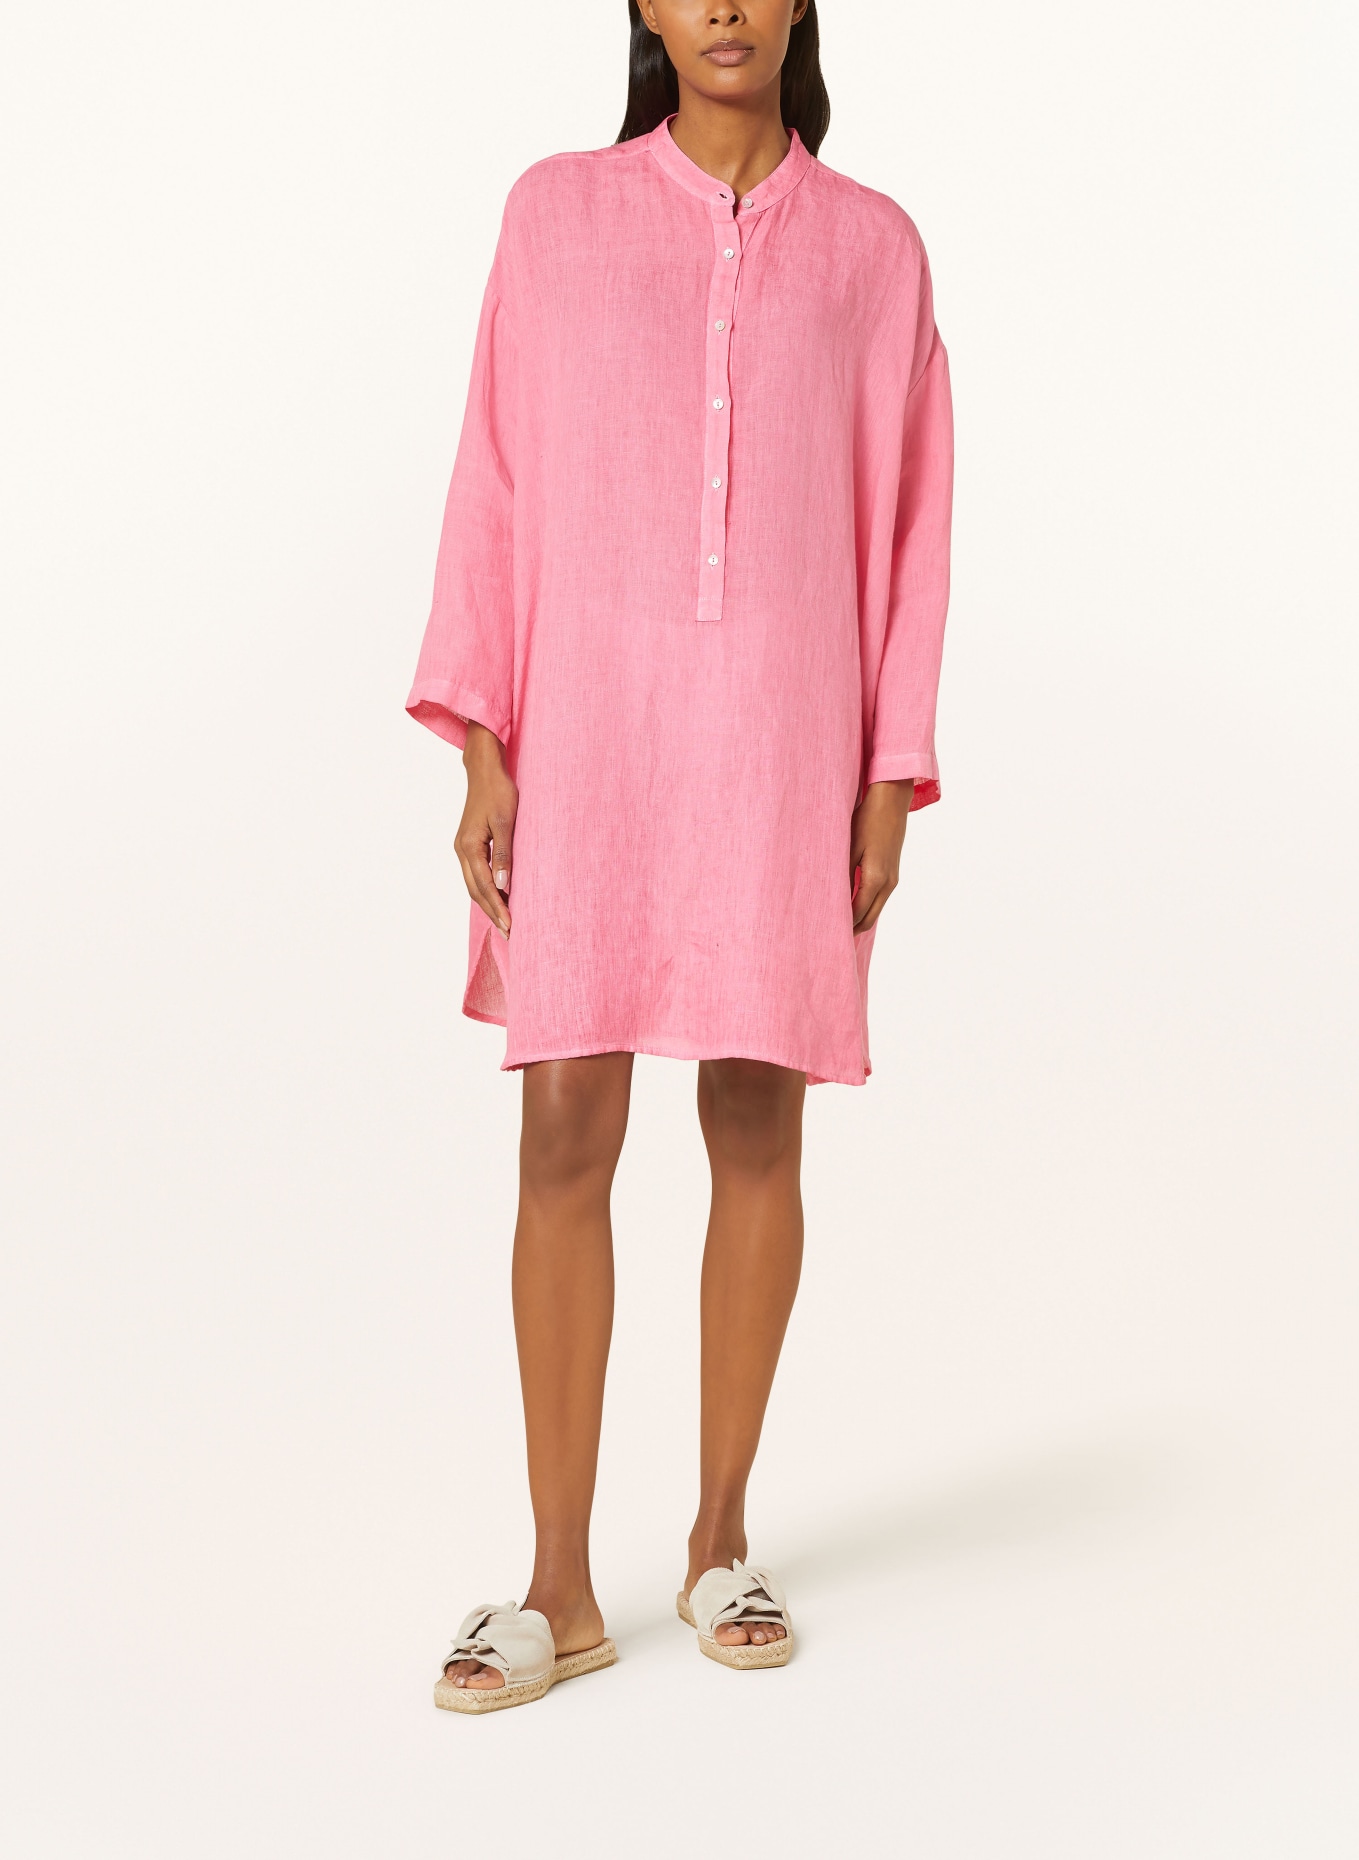 120%lino Beach dress made of linen, Color: PINK (Image 2)